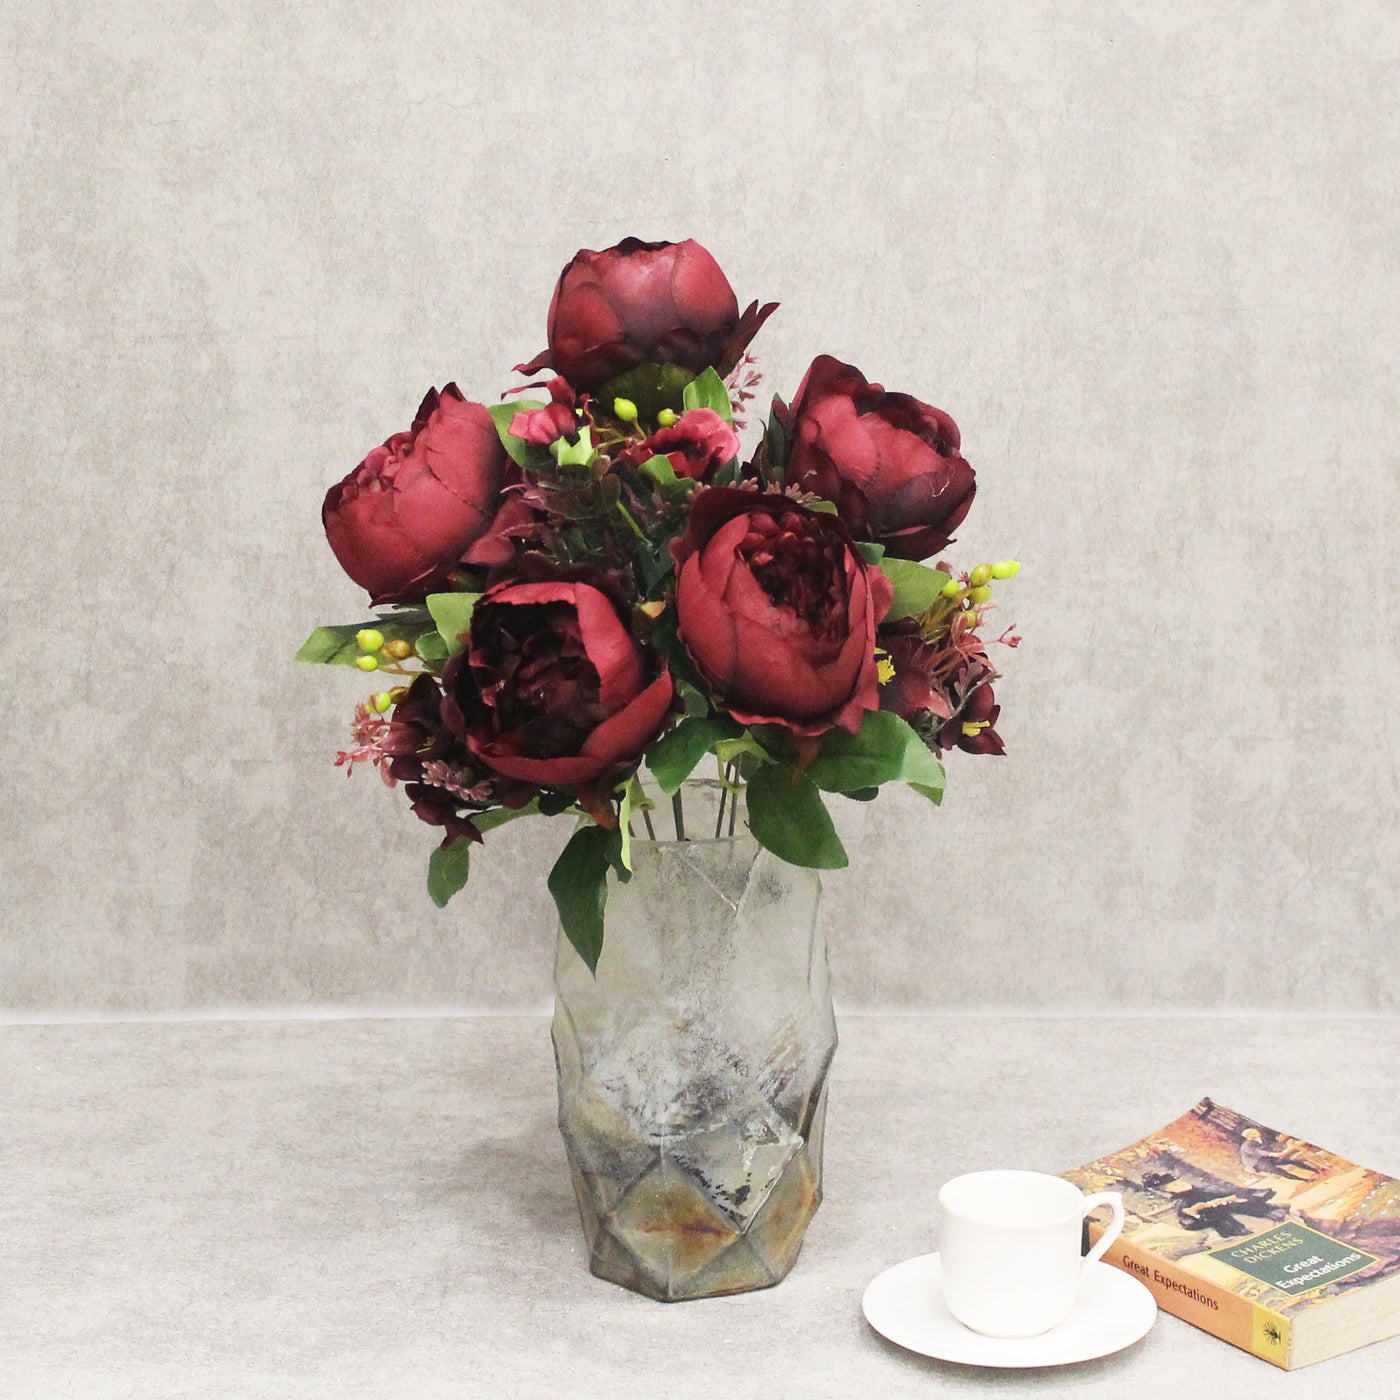 PolliNation Rose Artificial Flower Bunch without Pot for Home Decoration (Pack of 1, 7 Inch).